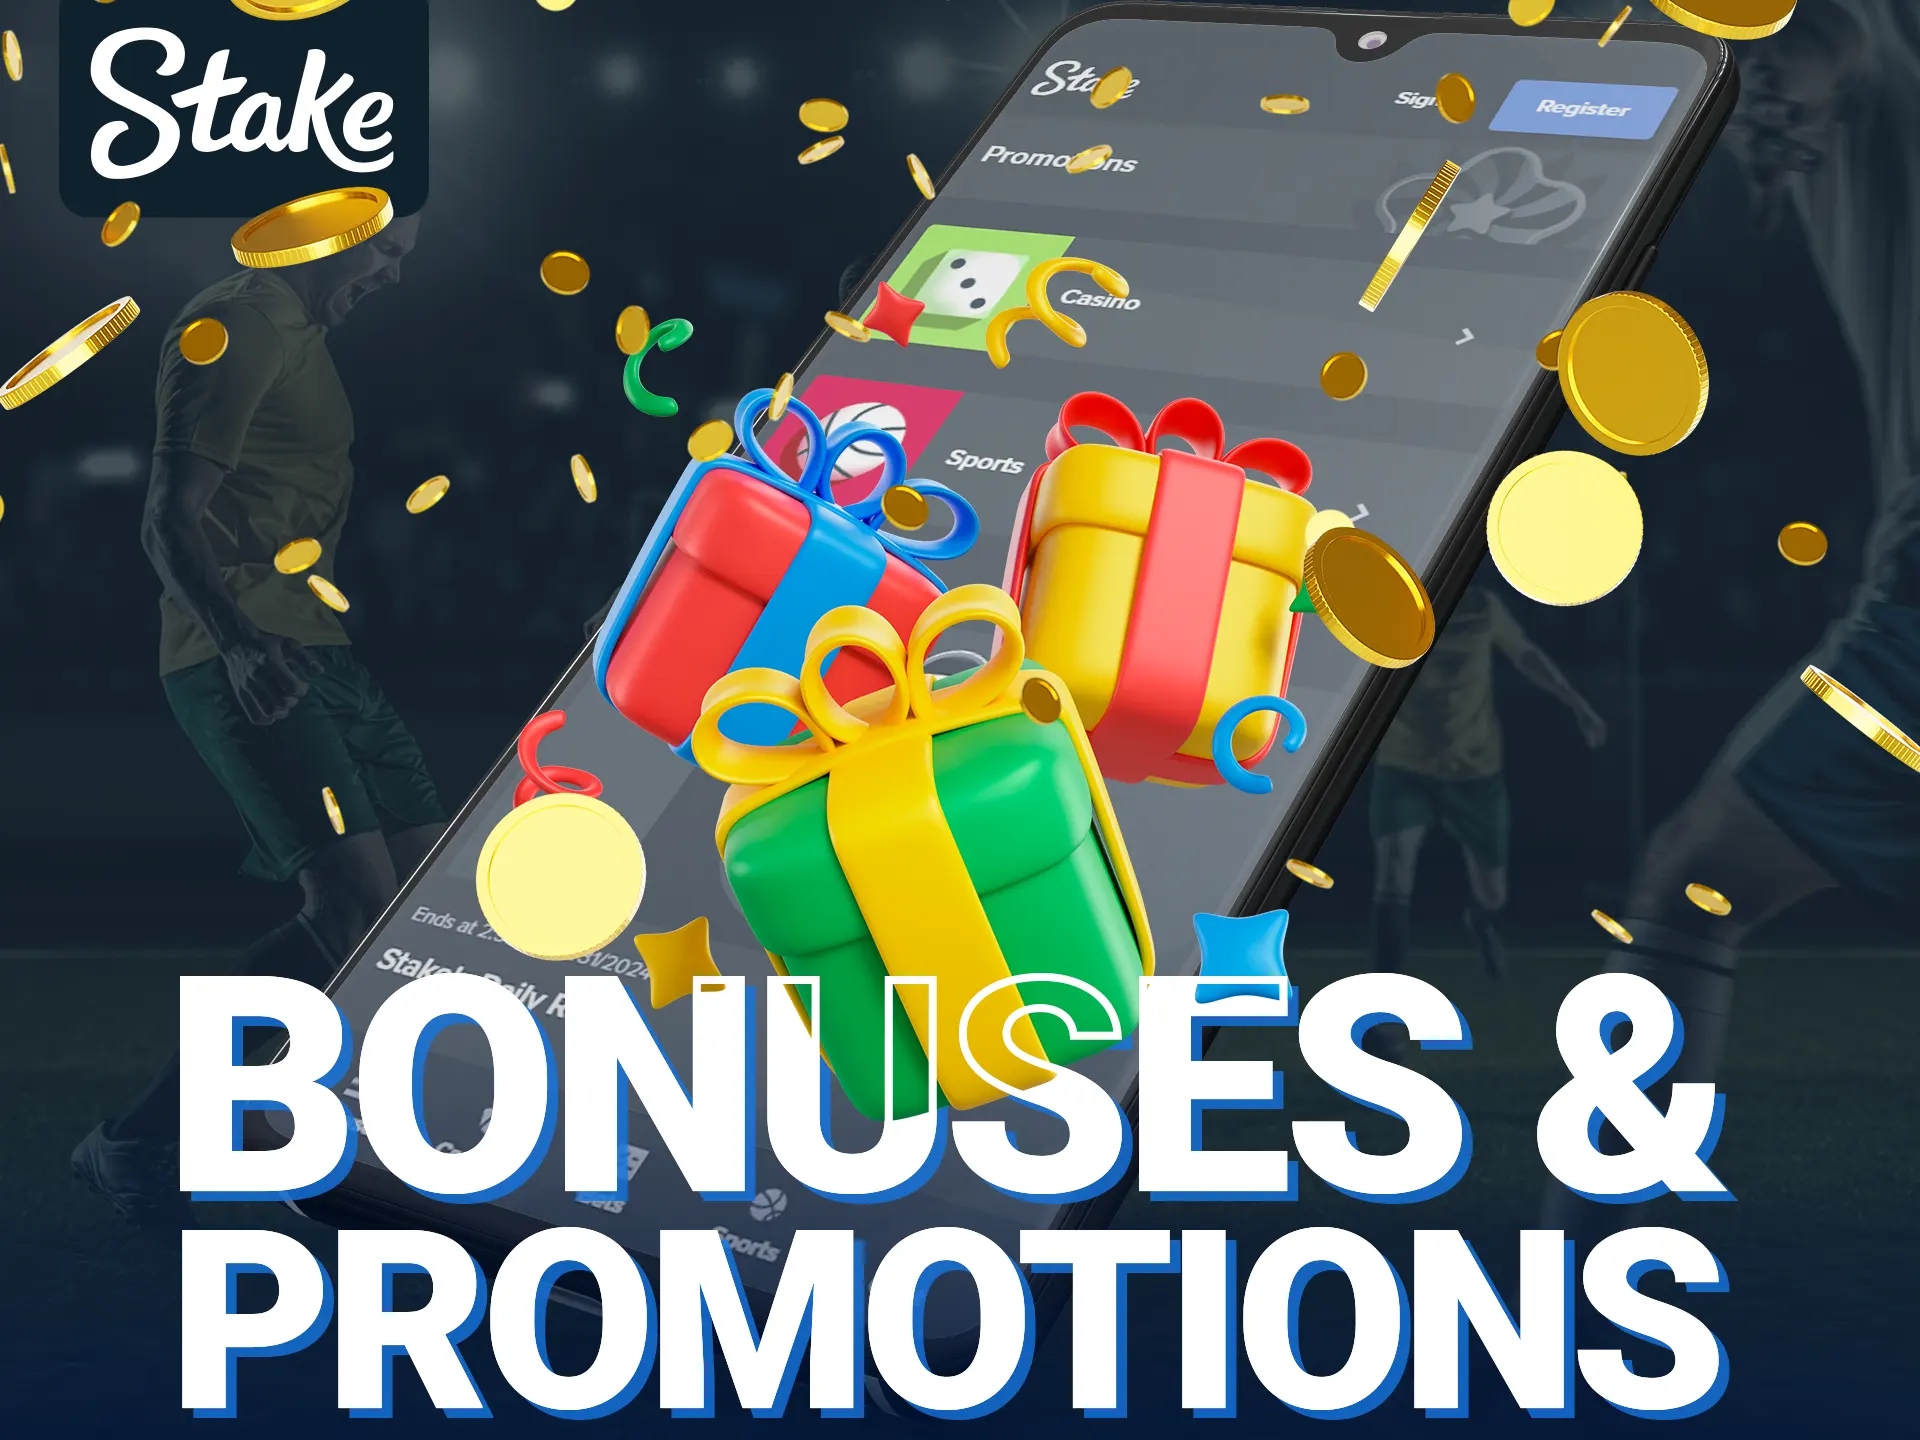 Stake Casino offers diverse and generous bonuses.